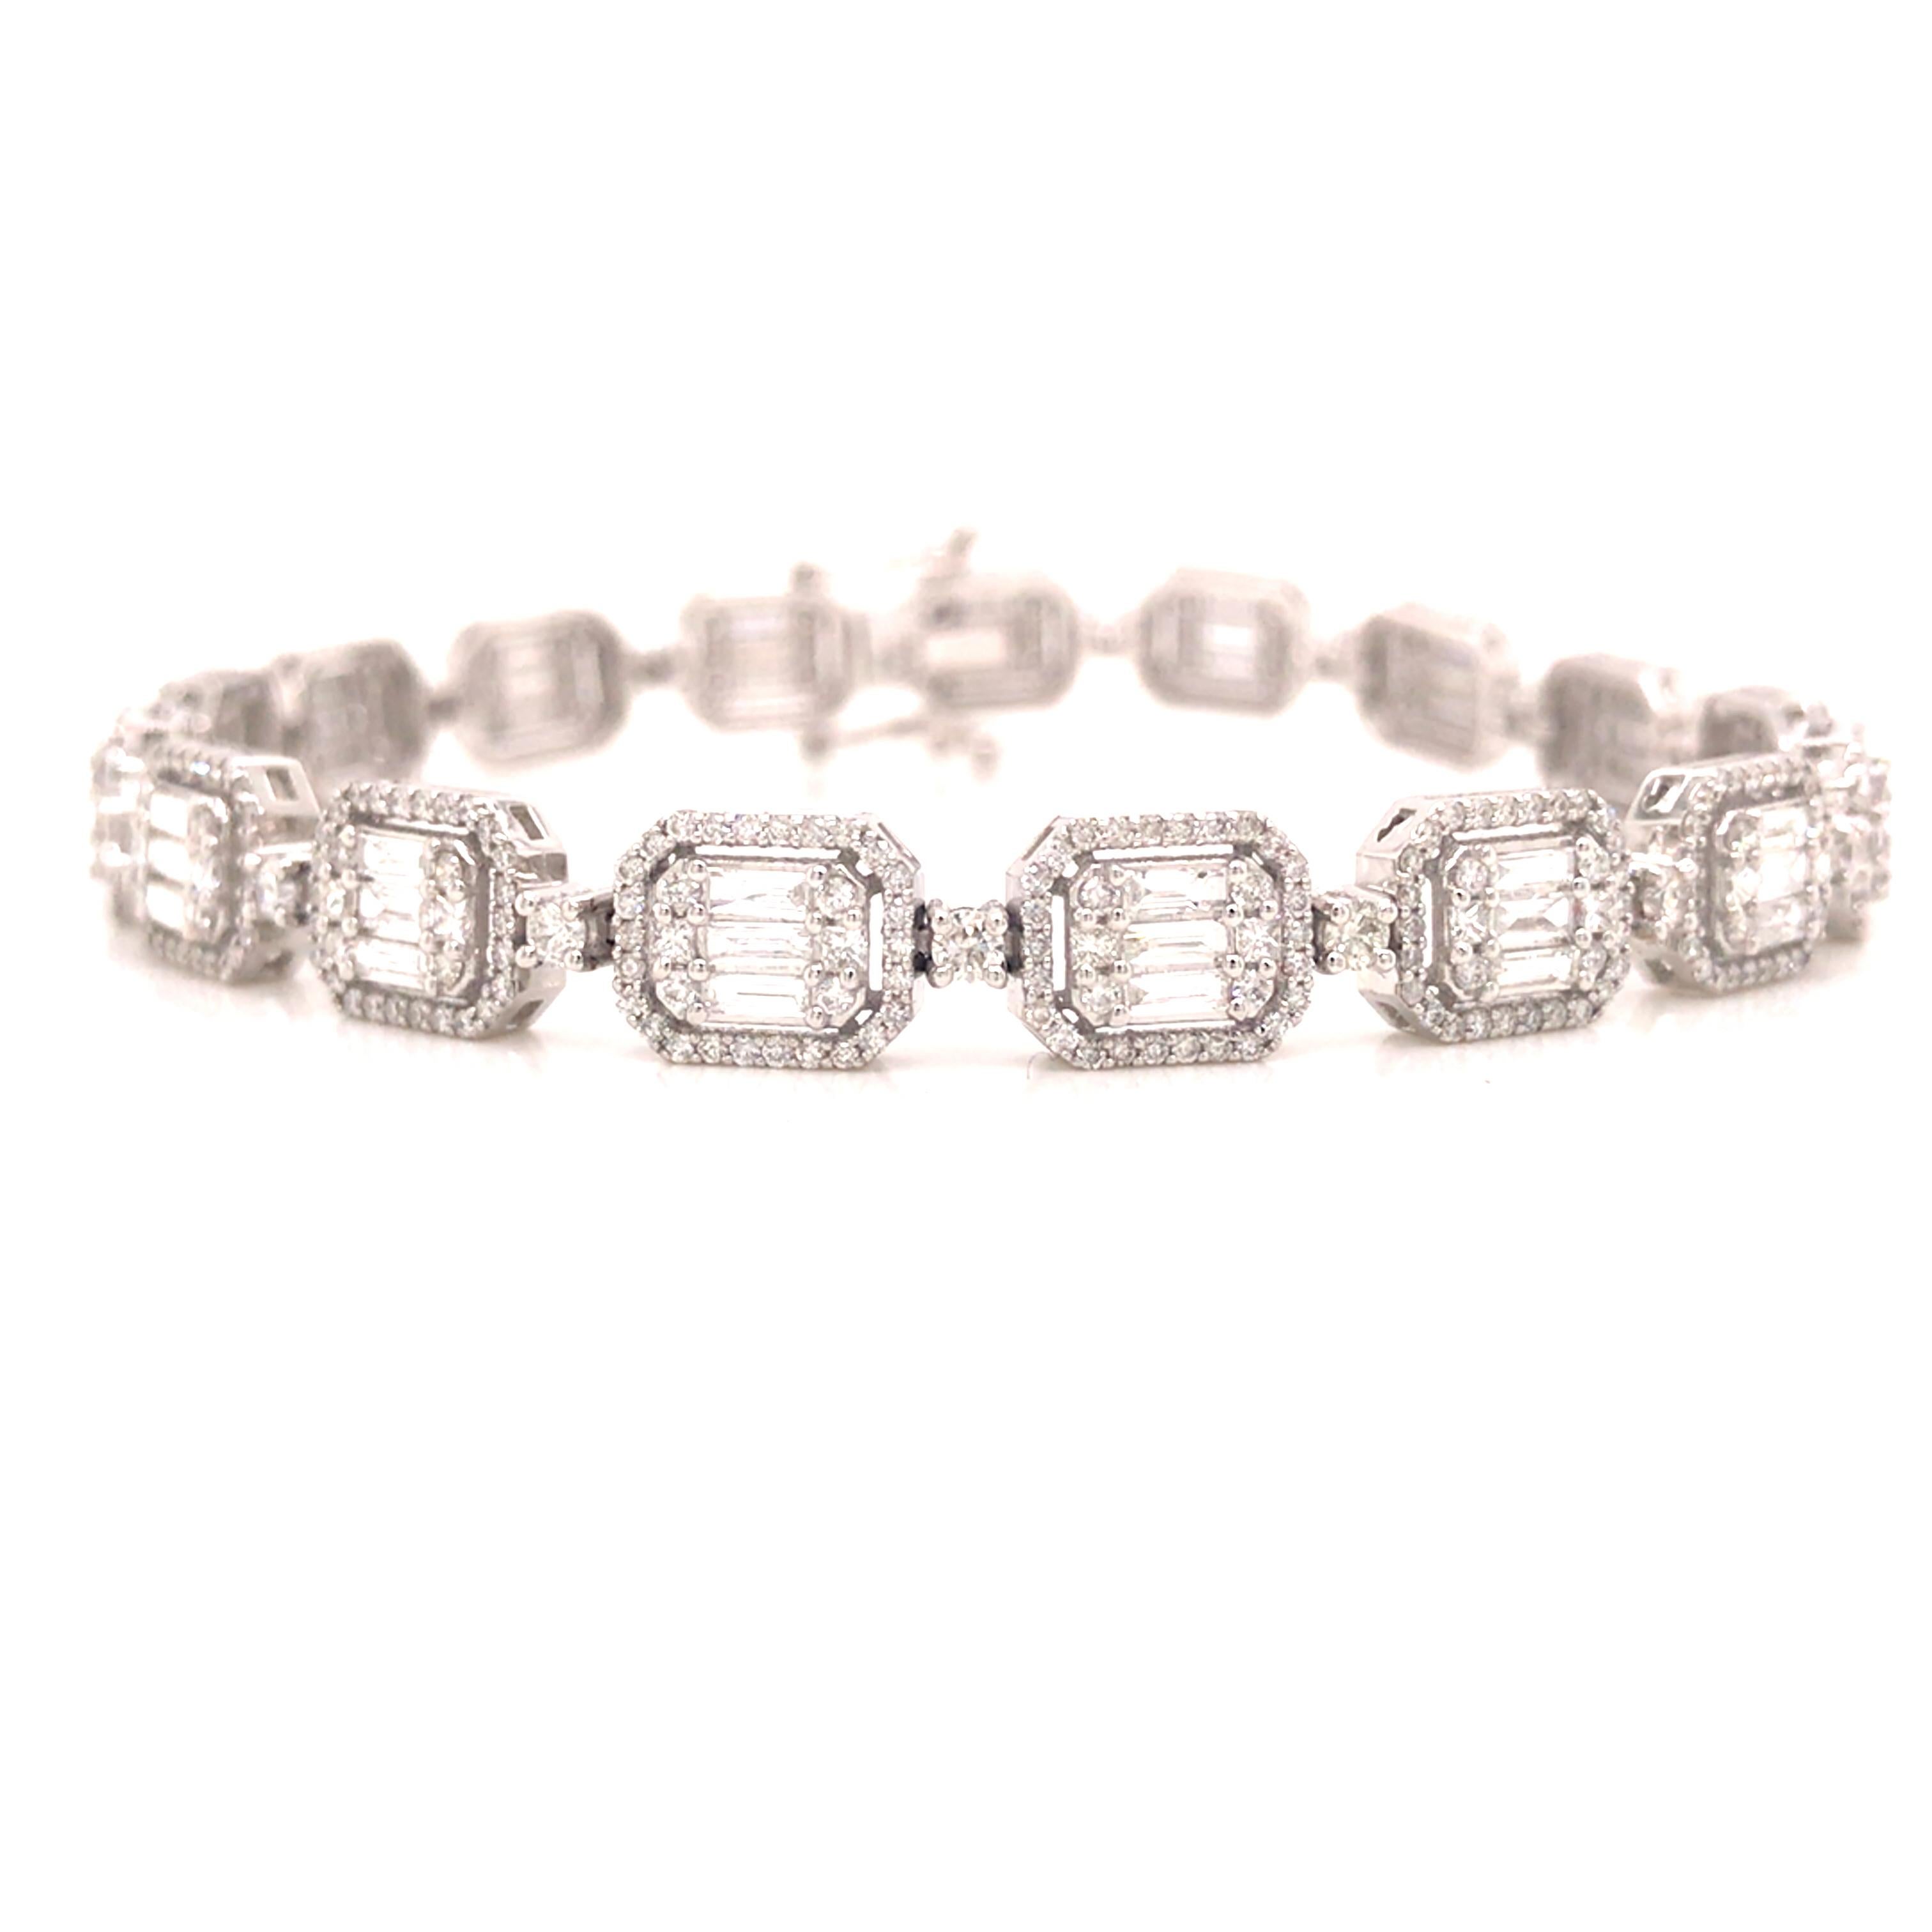 Diamond Cluster Tennis Bracelet in 18K White Gold.  Round Brilliant Cut, Princess Cut and Baguette Diamonds weighing 4.44 carat total weight, G-H in color and VS-SI in clarity are expertly set.  The Bracelet measures 7 1/4 inch in length and 1/4